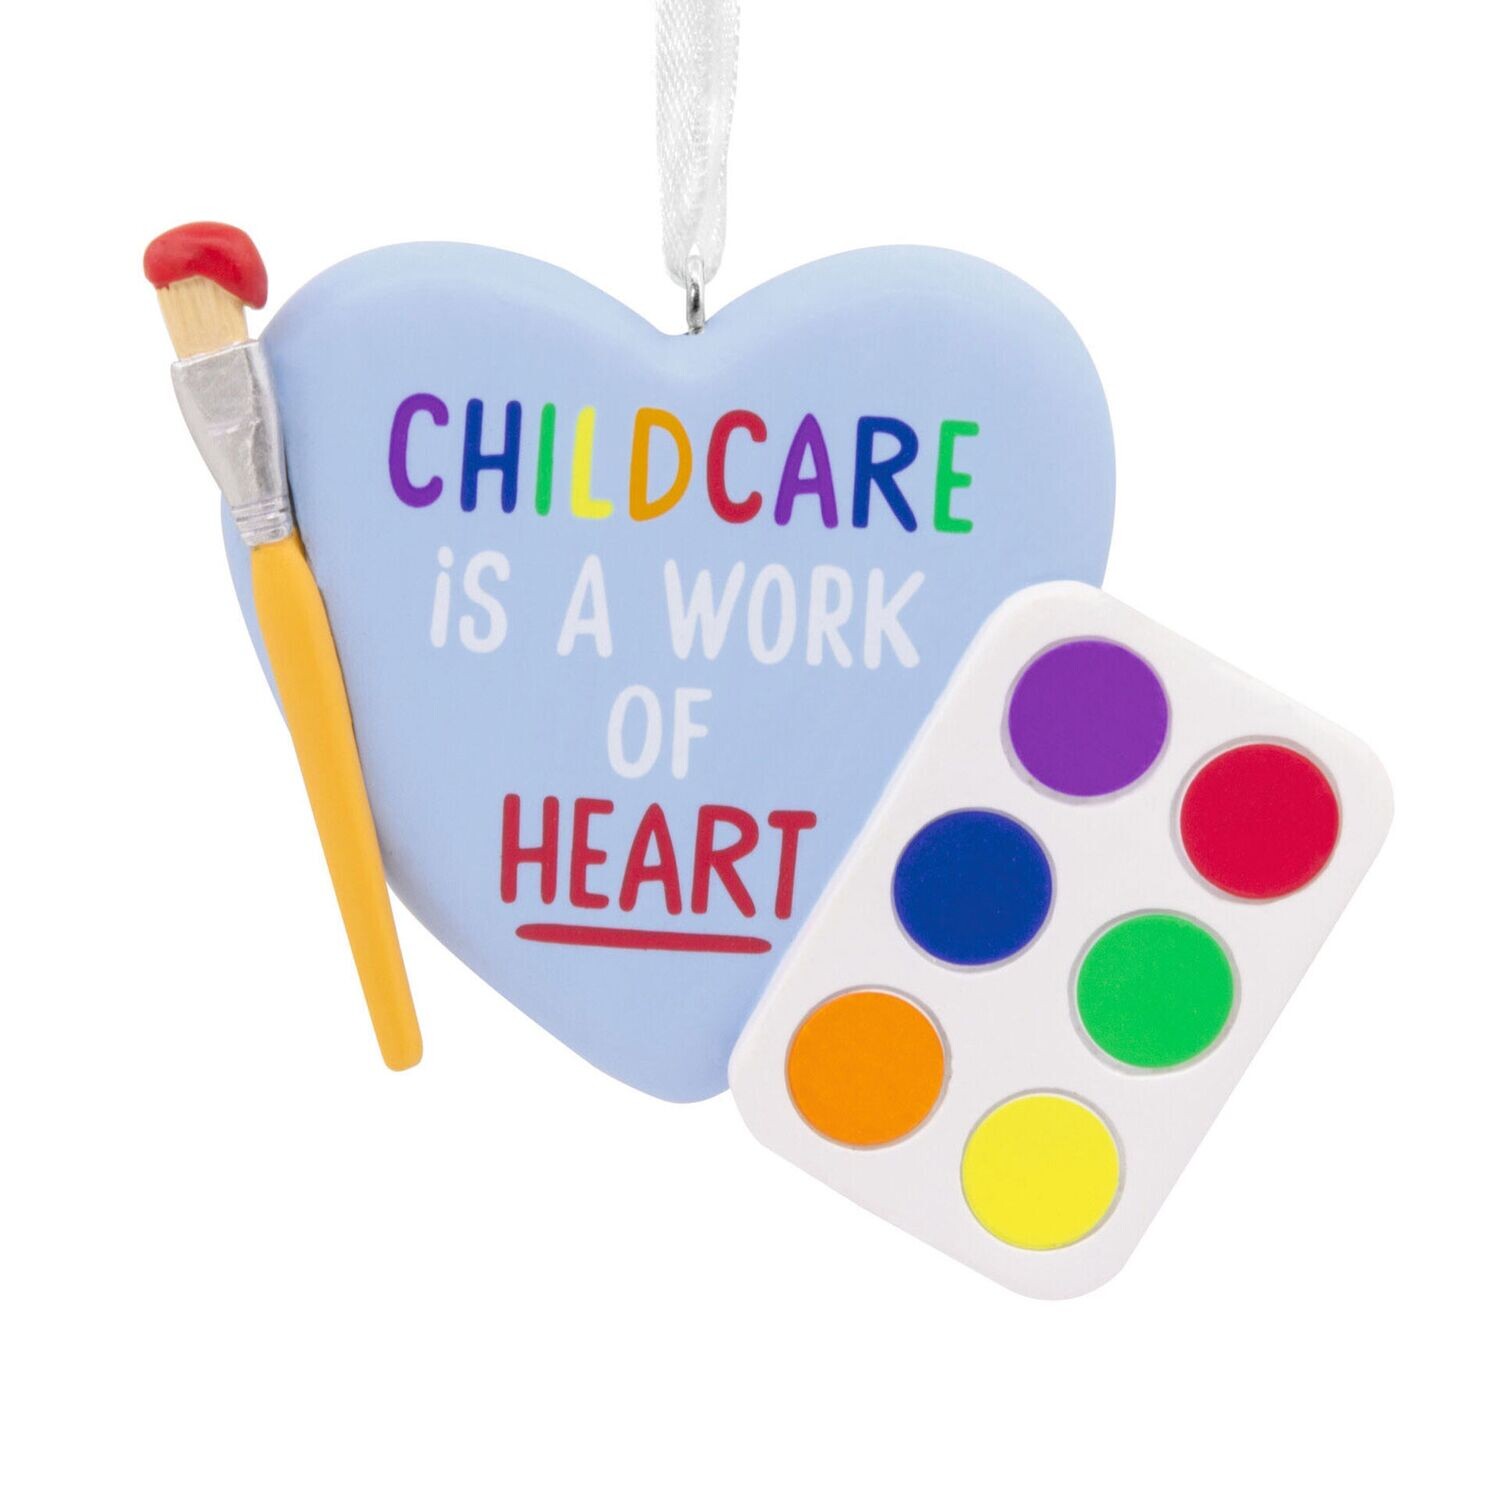 Childcare Is a Work of Heart Hallmark Ornament+